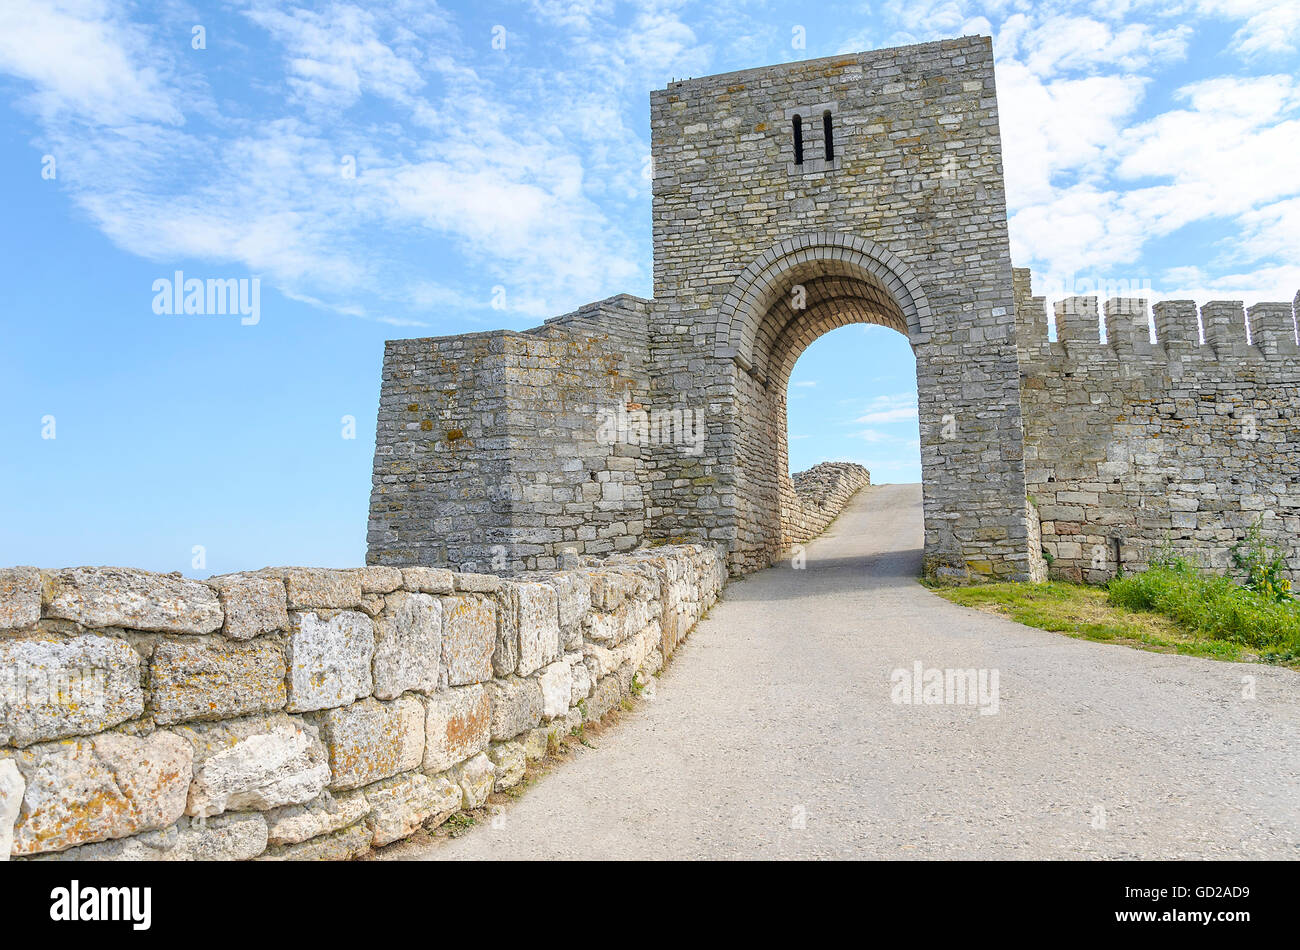 Entrance to the old fortress on a sky background. Stock Photo